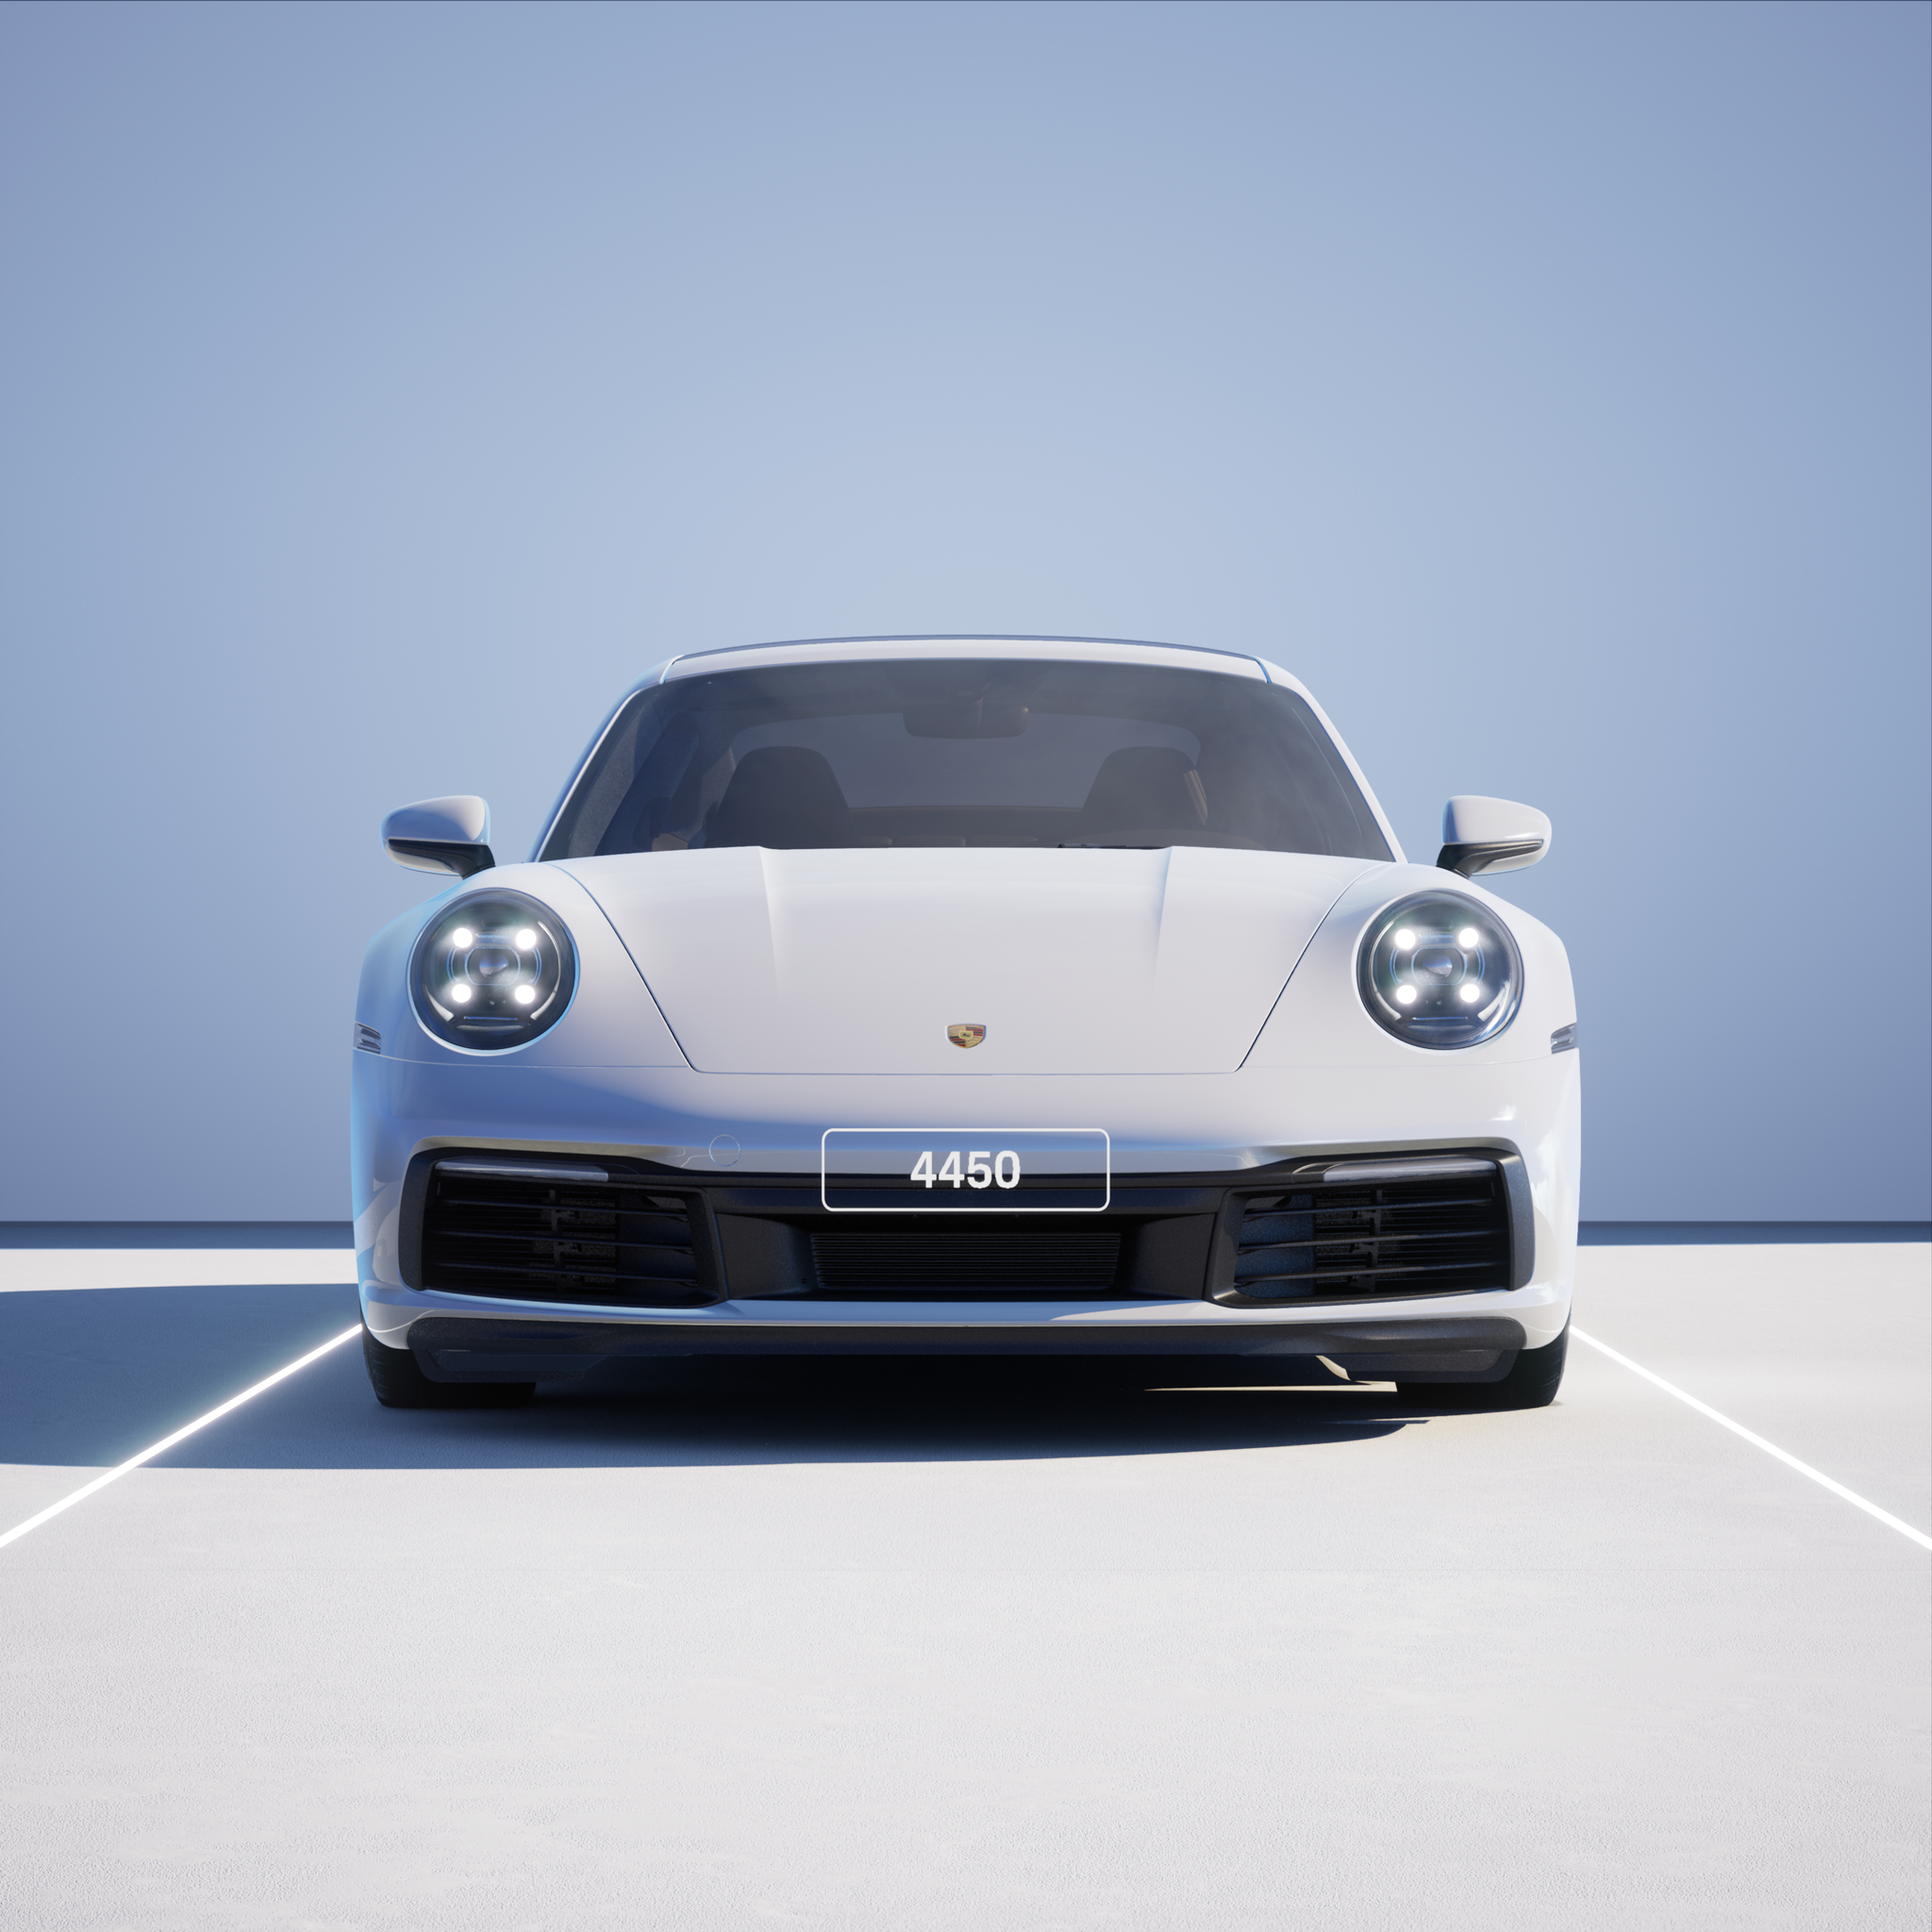 The PORSCHΞ 911 4450 image in phase